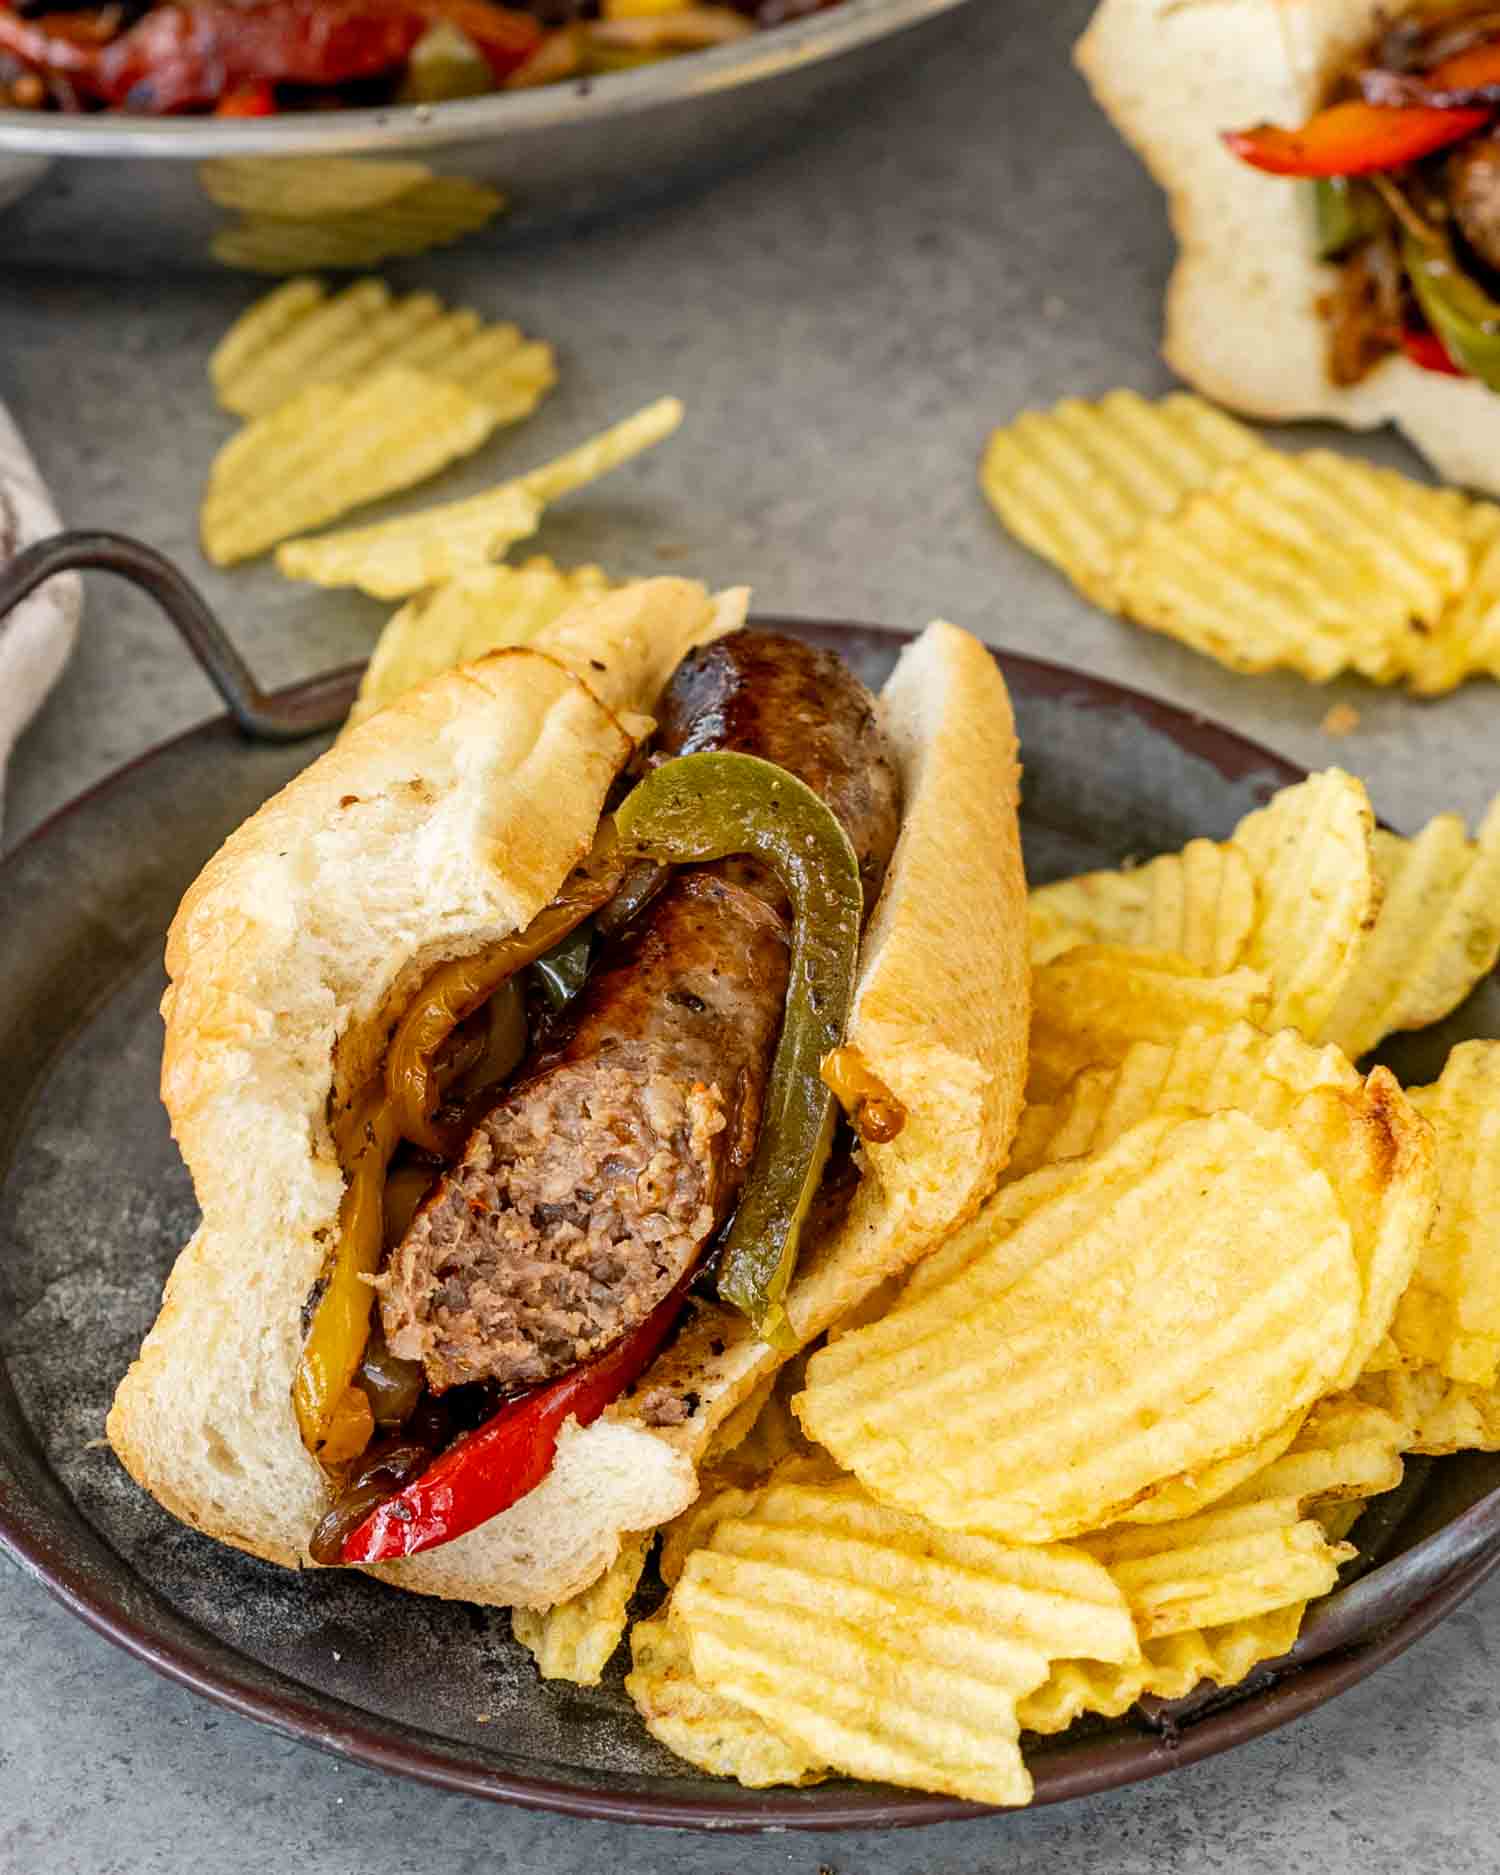 sausage peppers and onions in a hoagie roll alongside some potato chips.